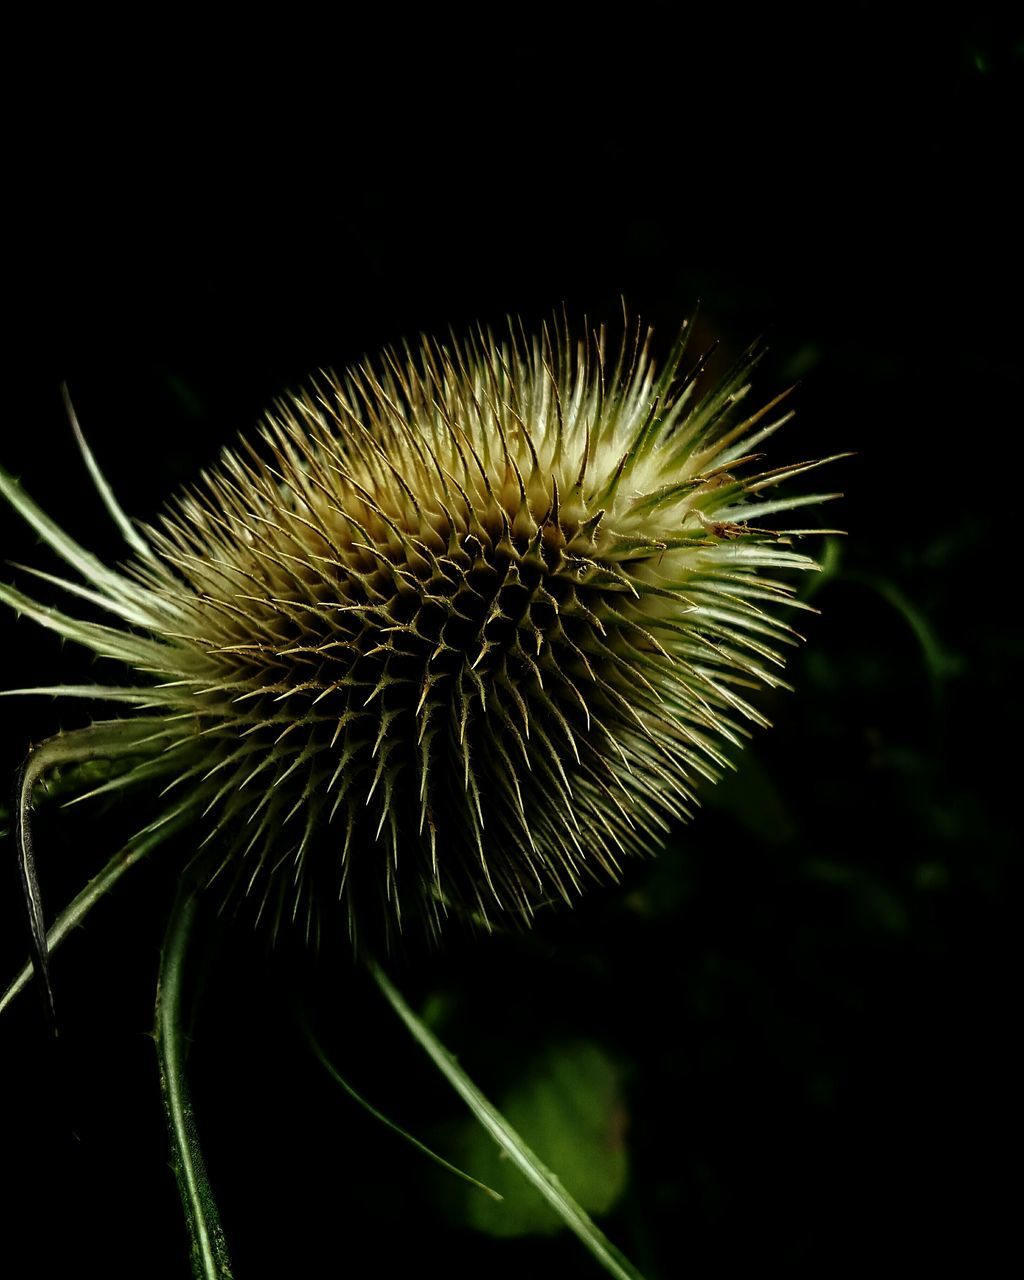 CLOSE-UP OF SPIKED PLANT